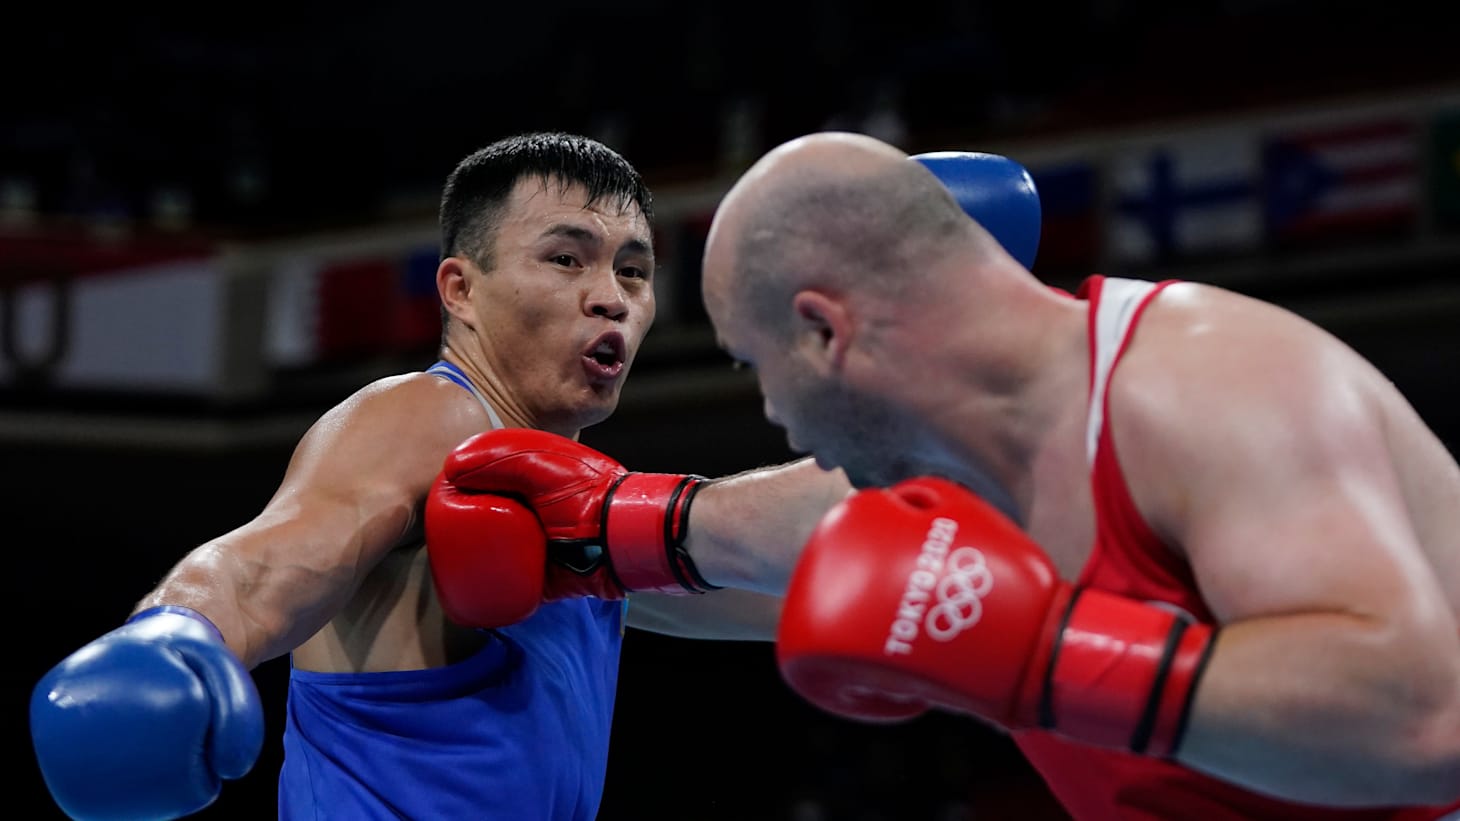 Kamshybek Kunkabayev and the quest for the boxing heavyweight double